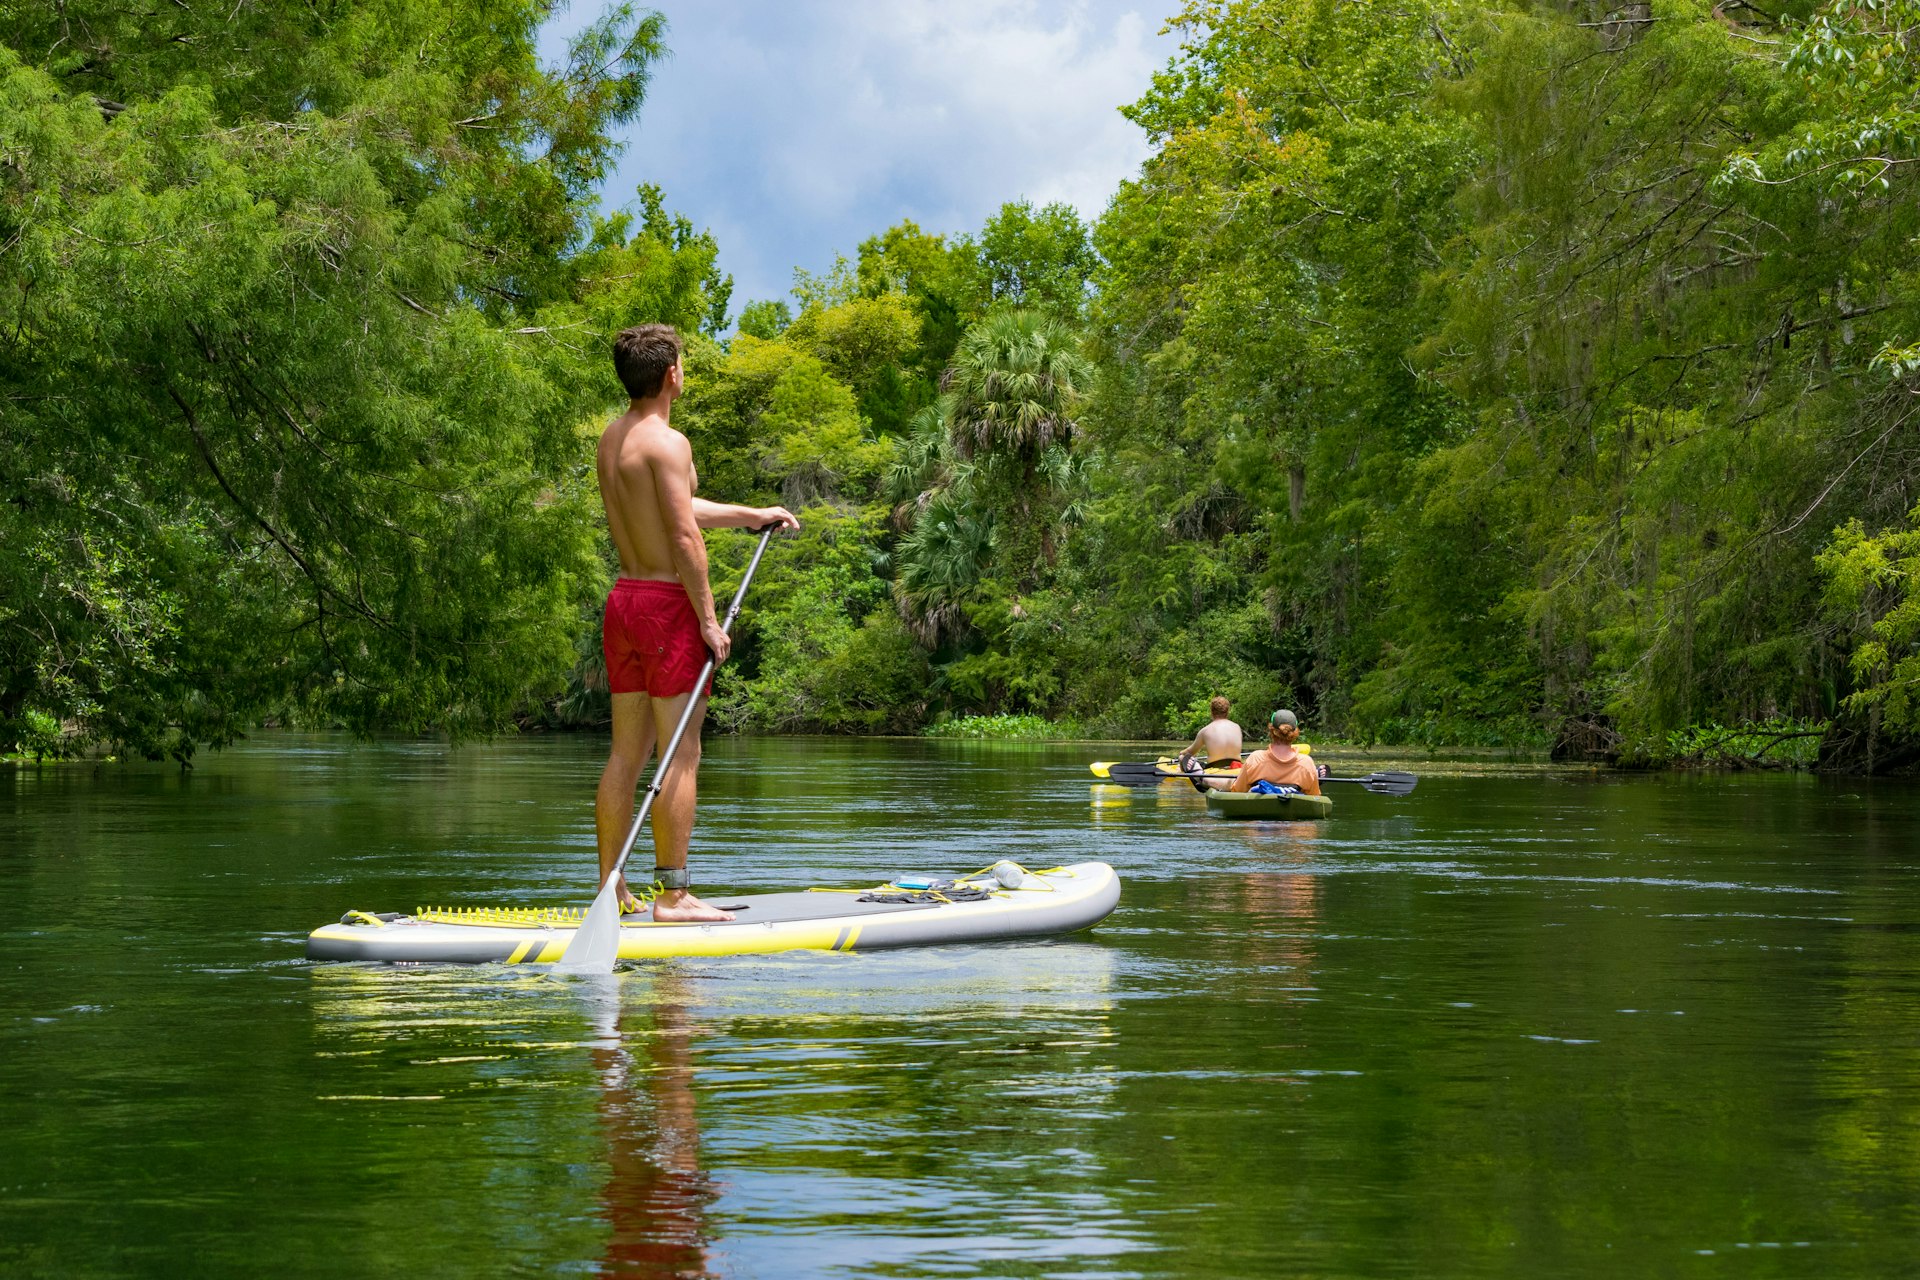 A man on a stand-up paddleboard and two kayakers on the Silver River, Marion County, Florida